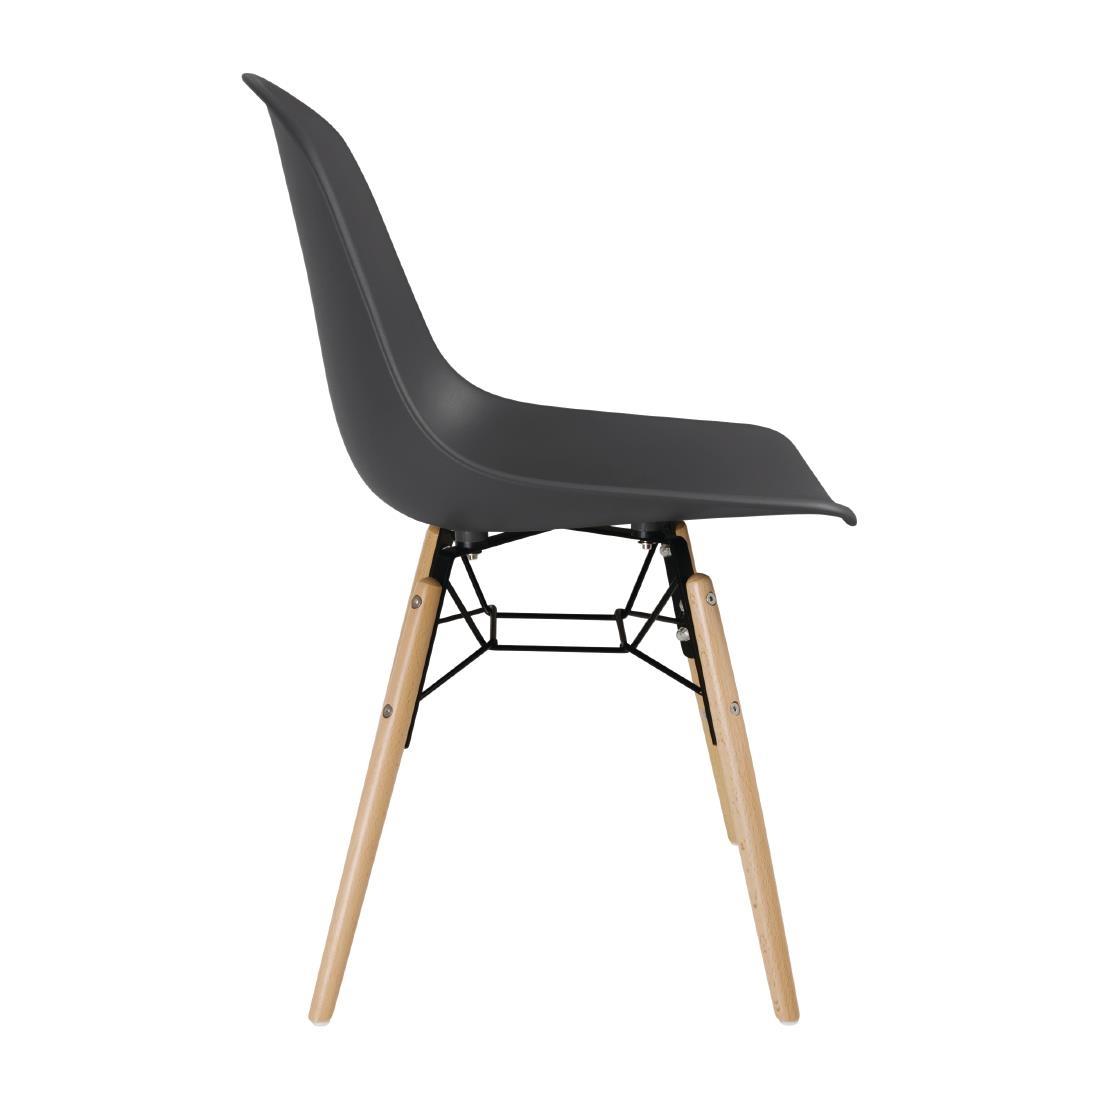 Bolero Arlo PP Moulded Side Chair Charcoal with Spindle Legs (Pack of 2) - DM841  - 2